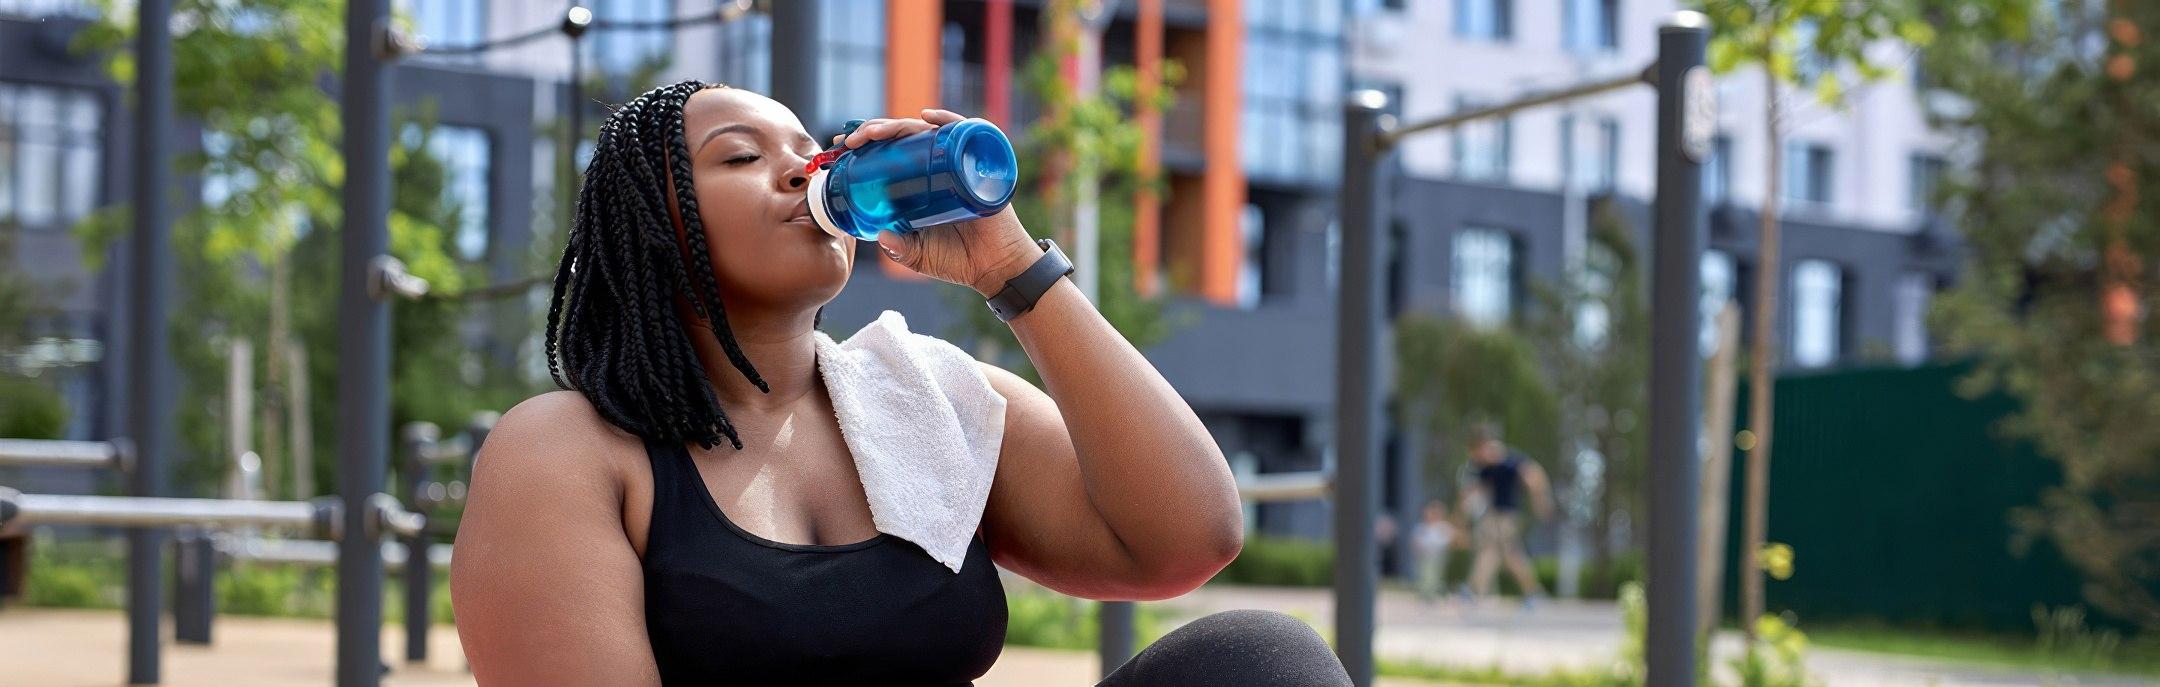 A healthy woman drinking water after working out